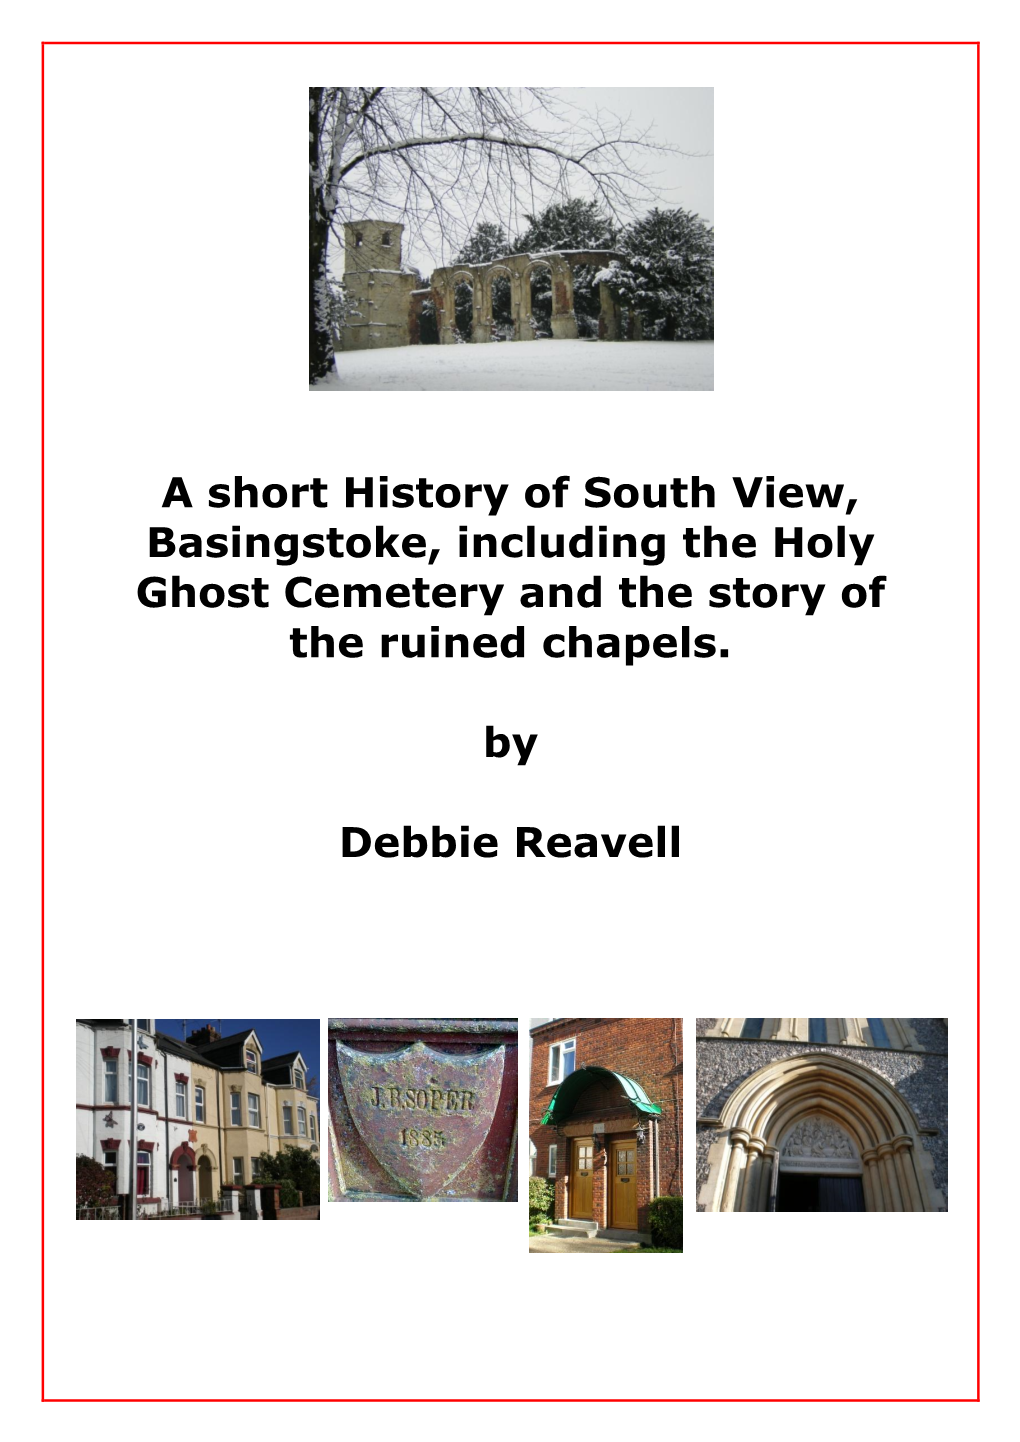 A Short History of South View, Basingstoke, Including the Holy Ghost Cemetery and the Story of the Ruined Chapels